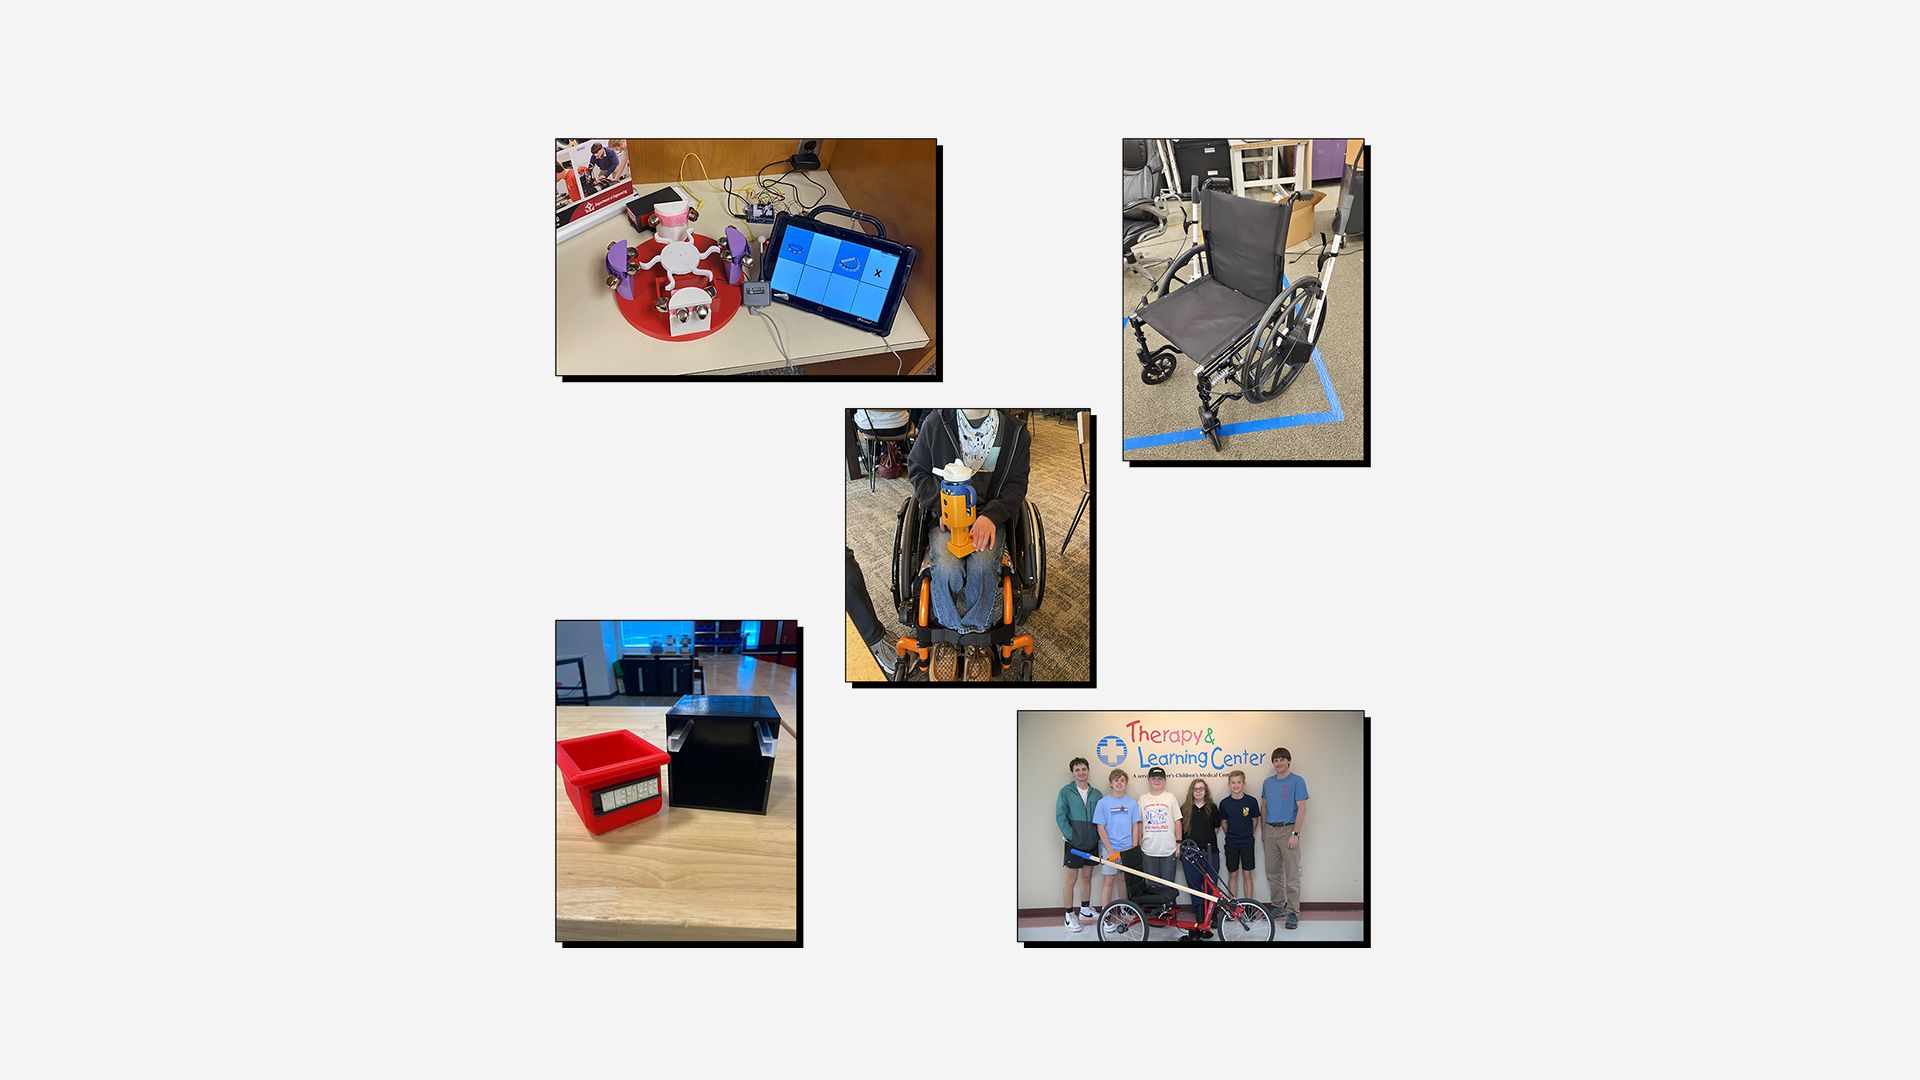 Collage of 3D printed assistive devices, designed for the Make:able Challenge.